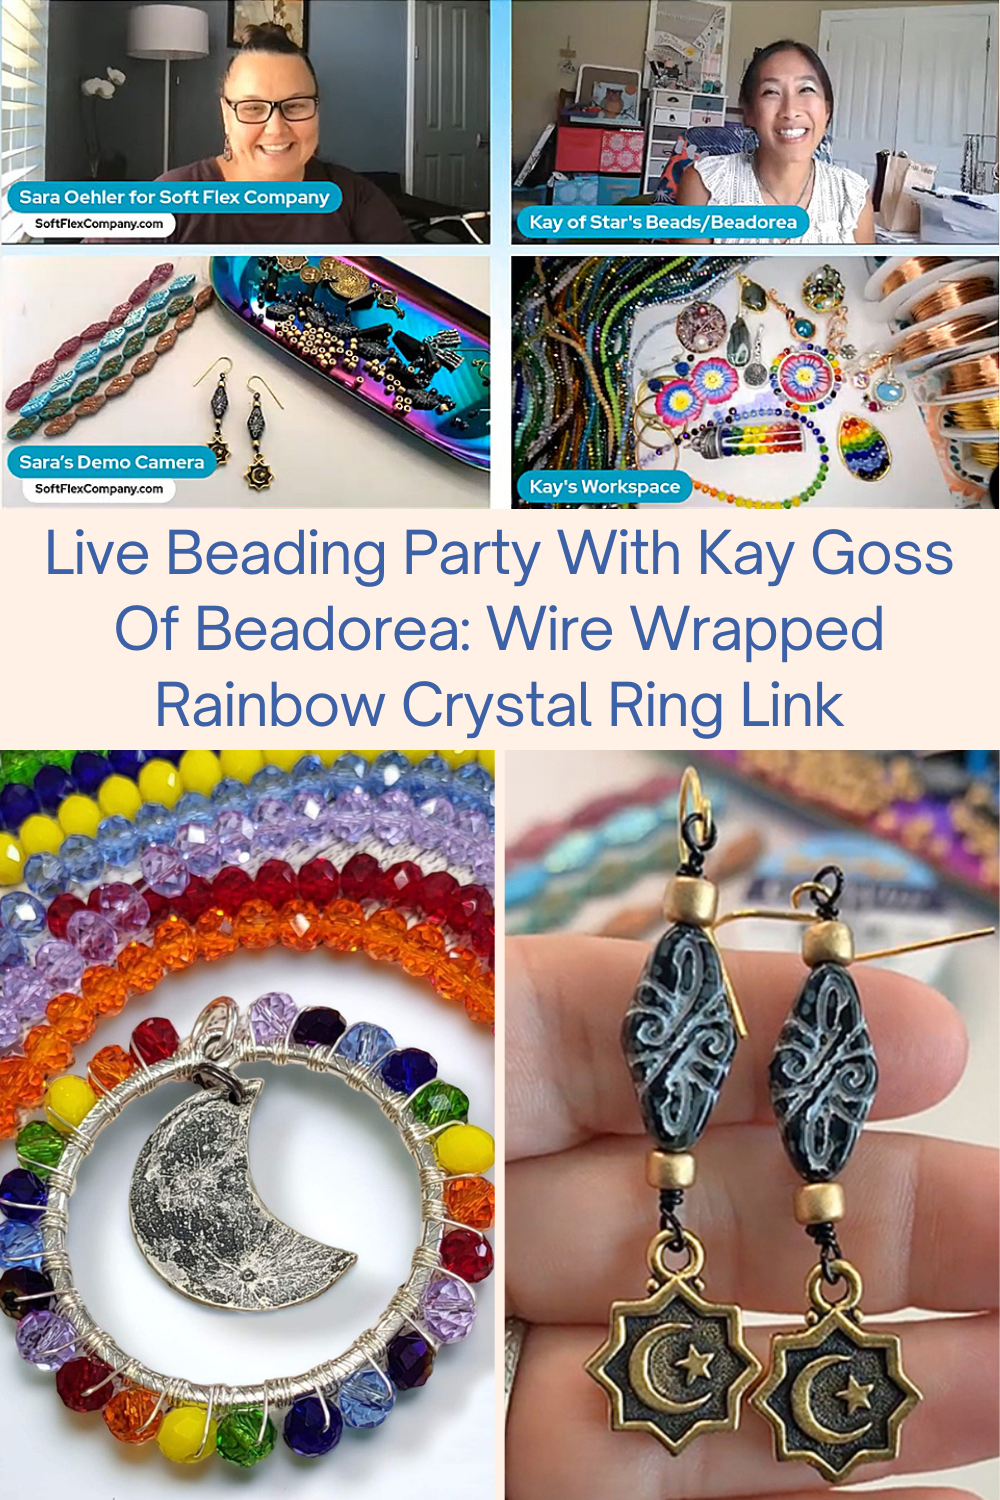 Live Beading Party With Kay Goss Of Beadorea Wire Wrapped Rainbow Crystal Ring Link Collage